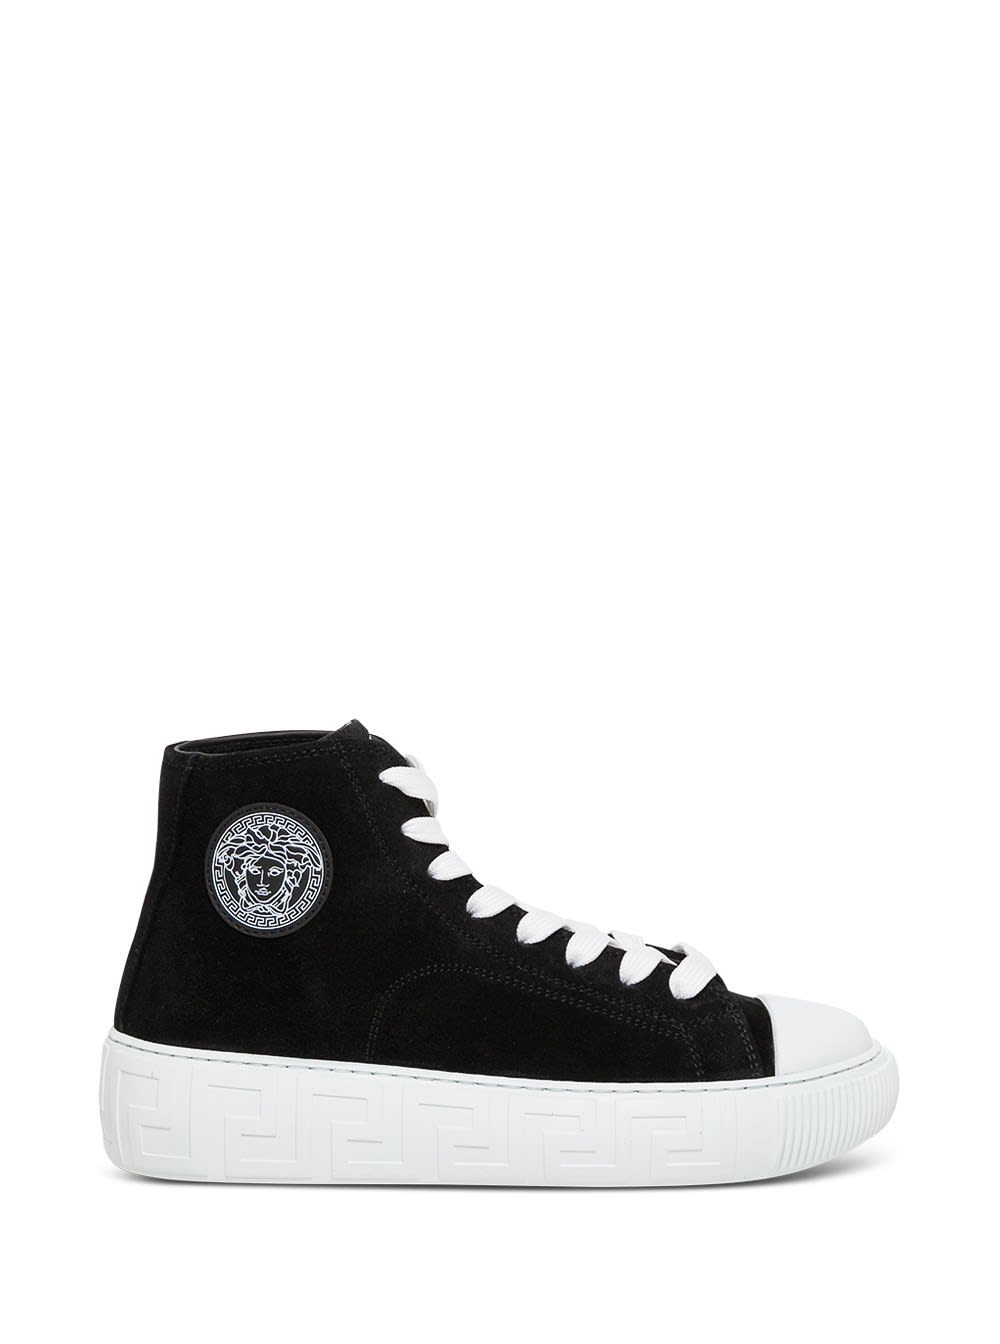 VERSACE GRECA SNEAKERS IN BLACK CANVAS WITH LOGO,DST643D1A007841B000